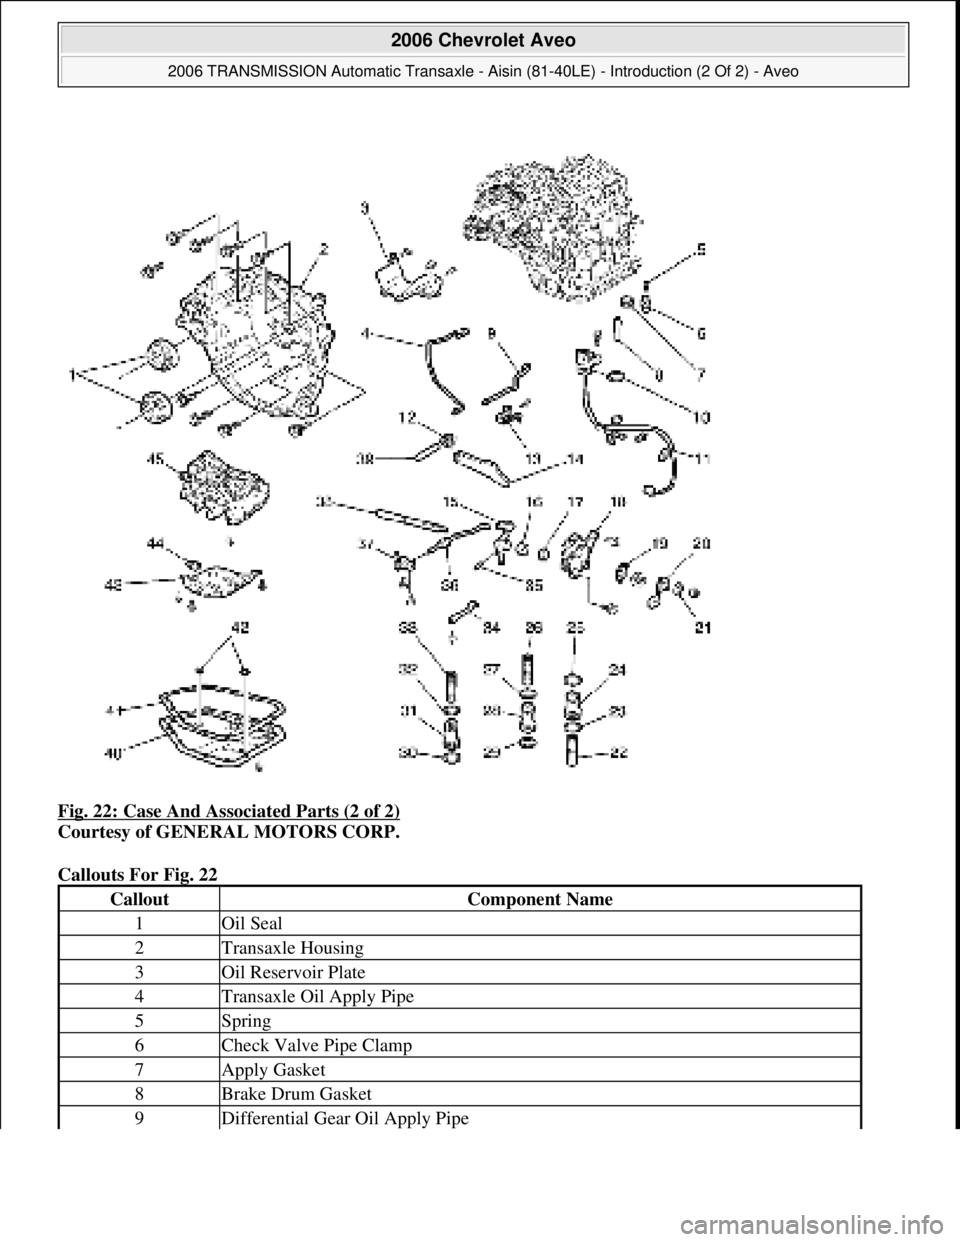 CHEVROLET AVEO 2002  Service Repair Manual Fig. 22: Case And Associated Parts (2 of 2) 
Courtesy of GENERAL MOTORS CORP. 
Callouts For Fig. 22 
CalloutComponent Name
1Oil Seal
2Transaxle Housing
3Oil Reservoir Plate
4Transaxle Oil Apply Pipe
5